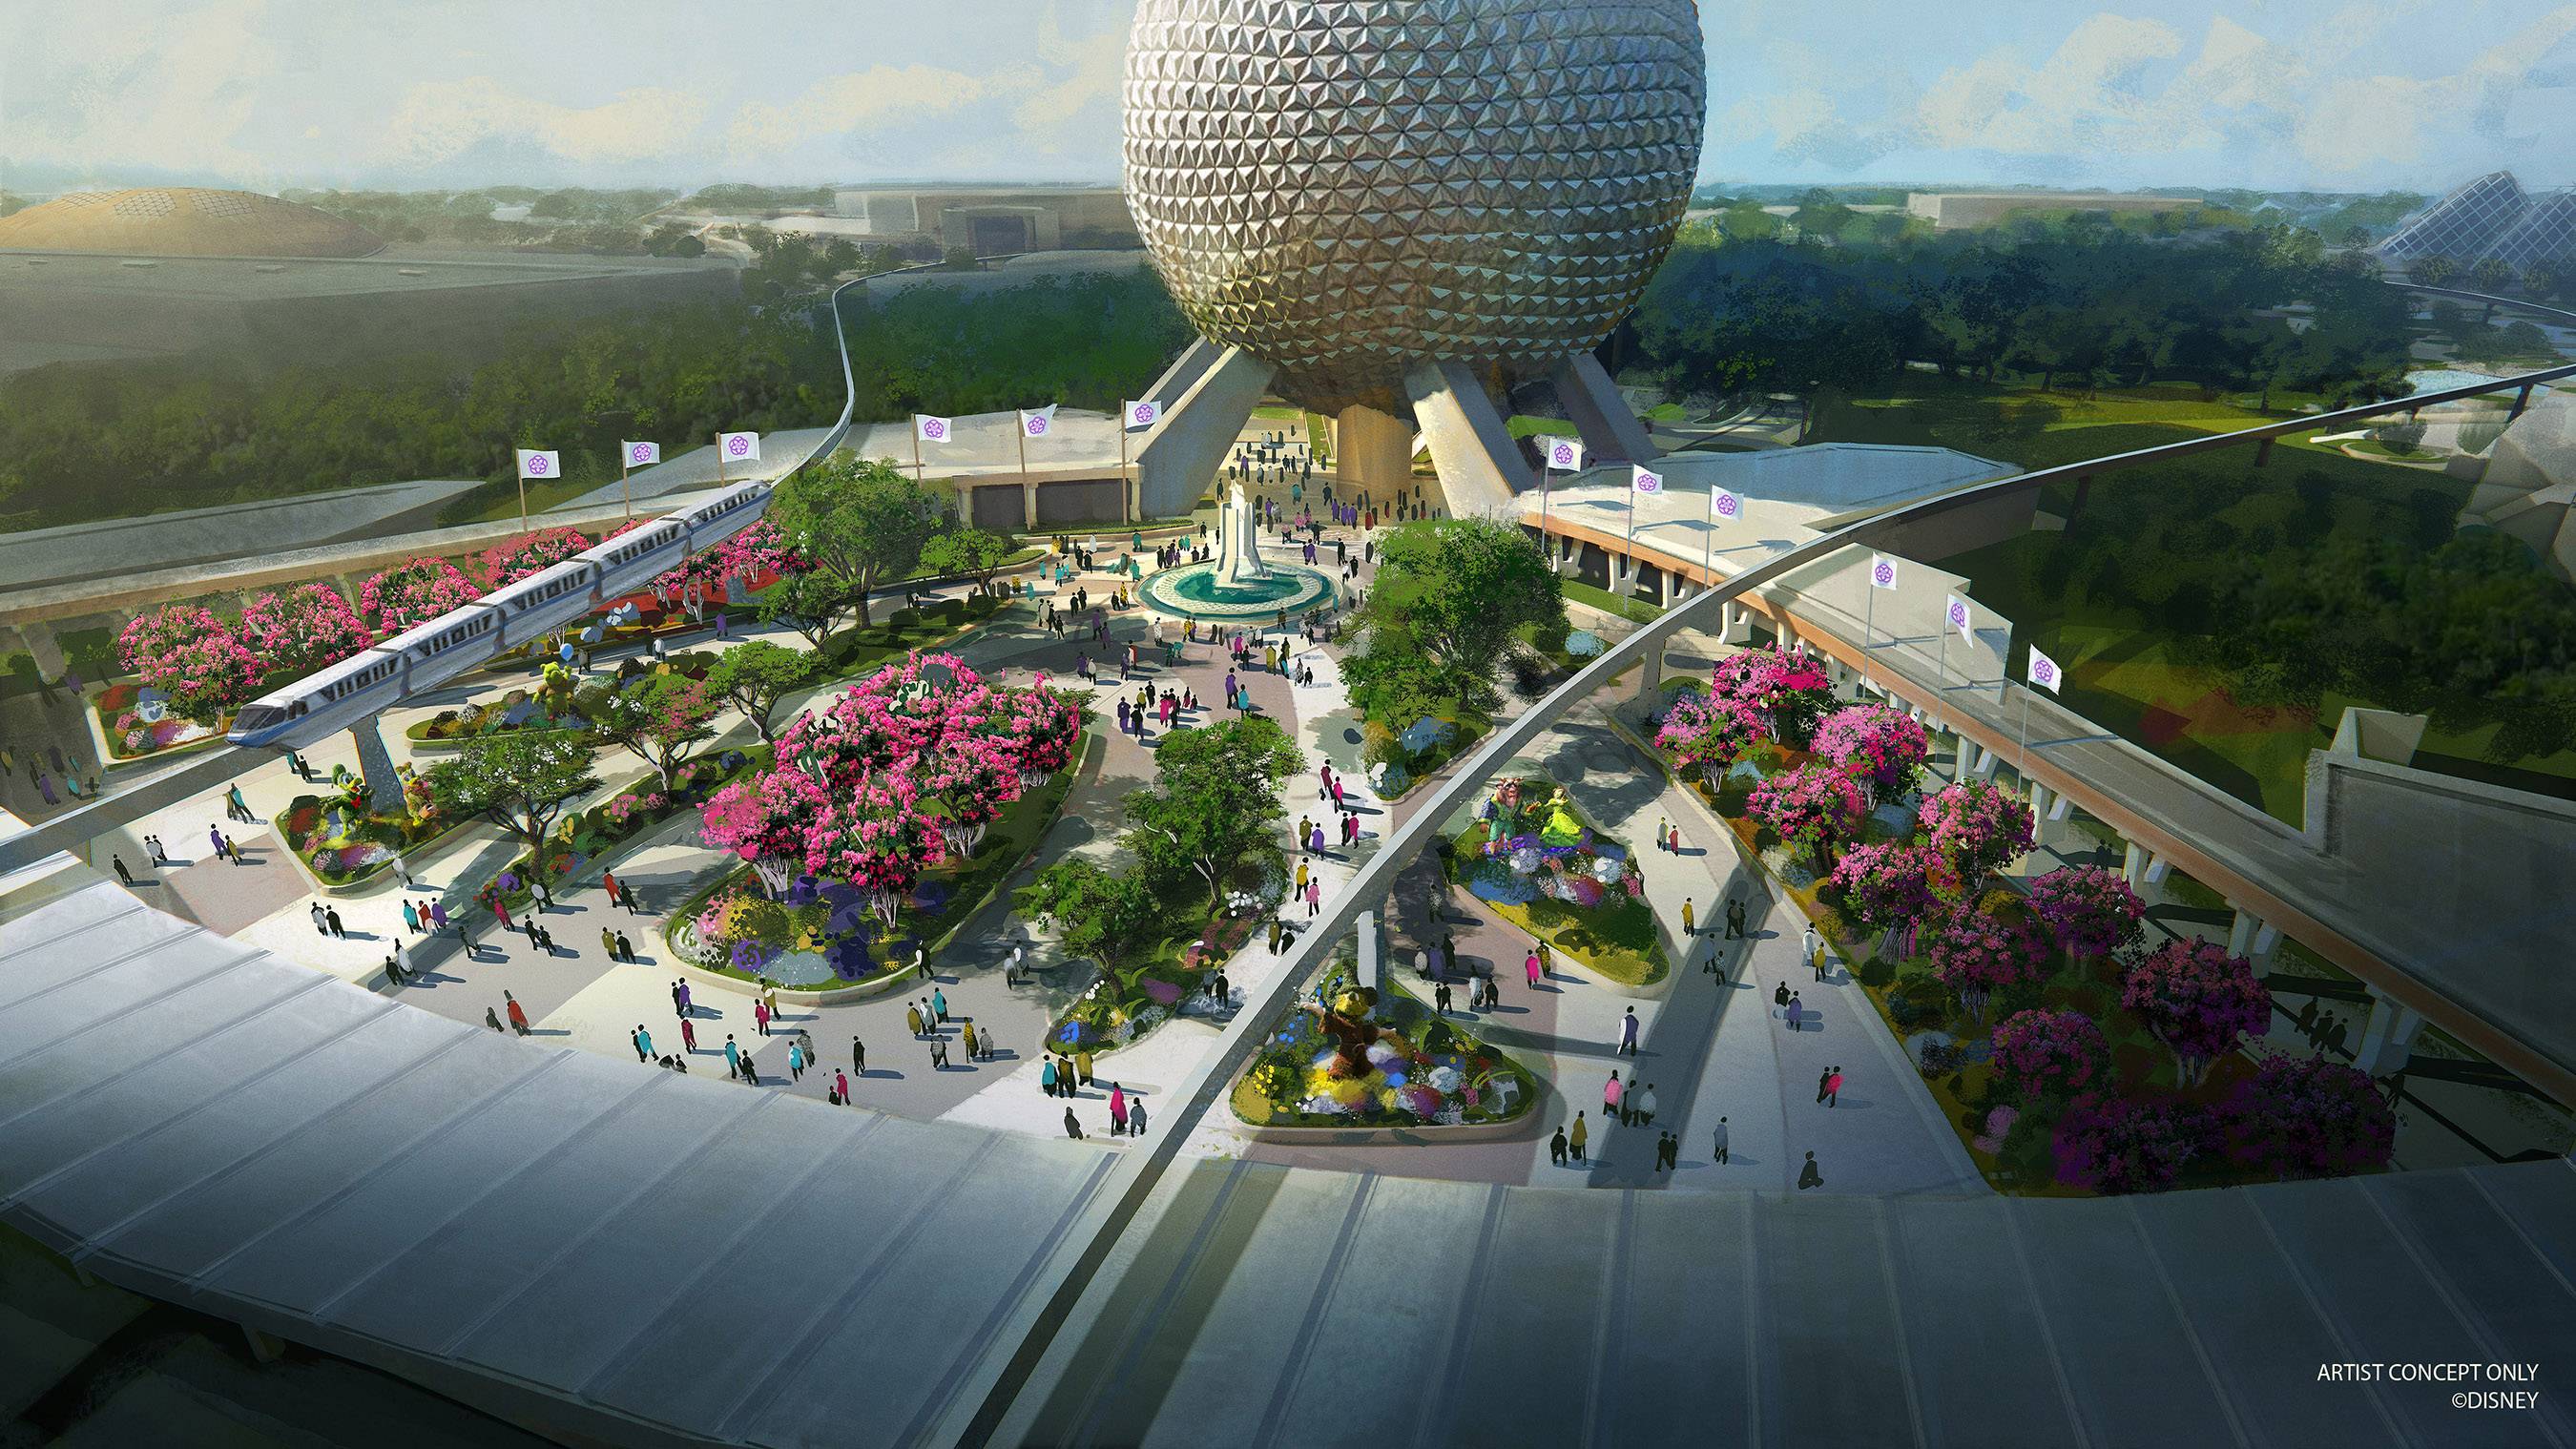 PHOTO - New design for Epcot's main entrance revealed